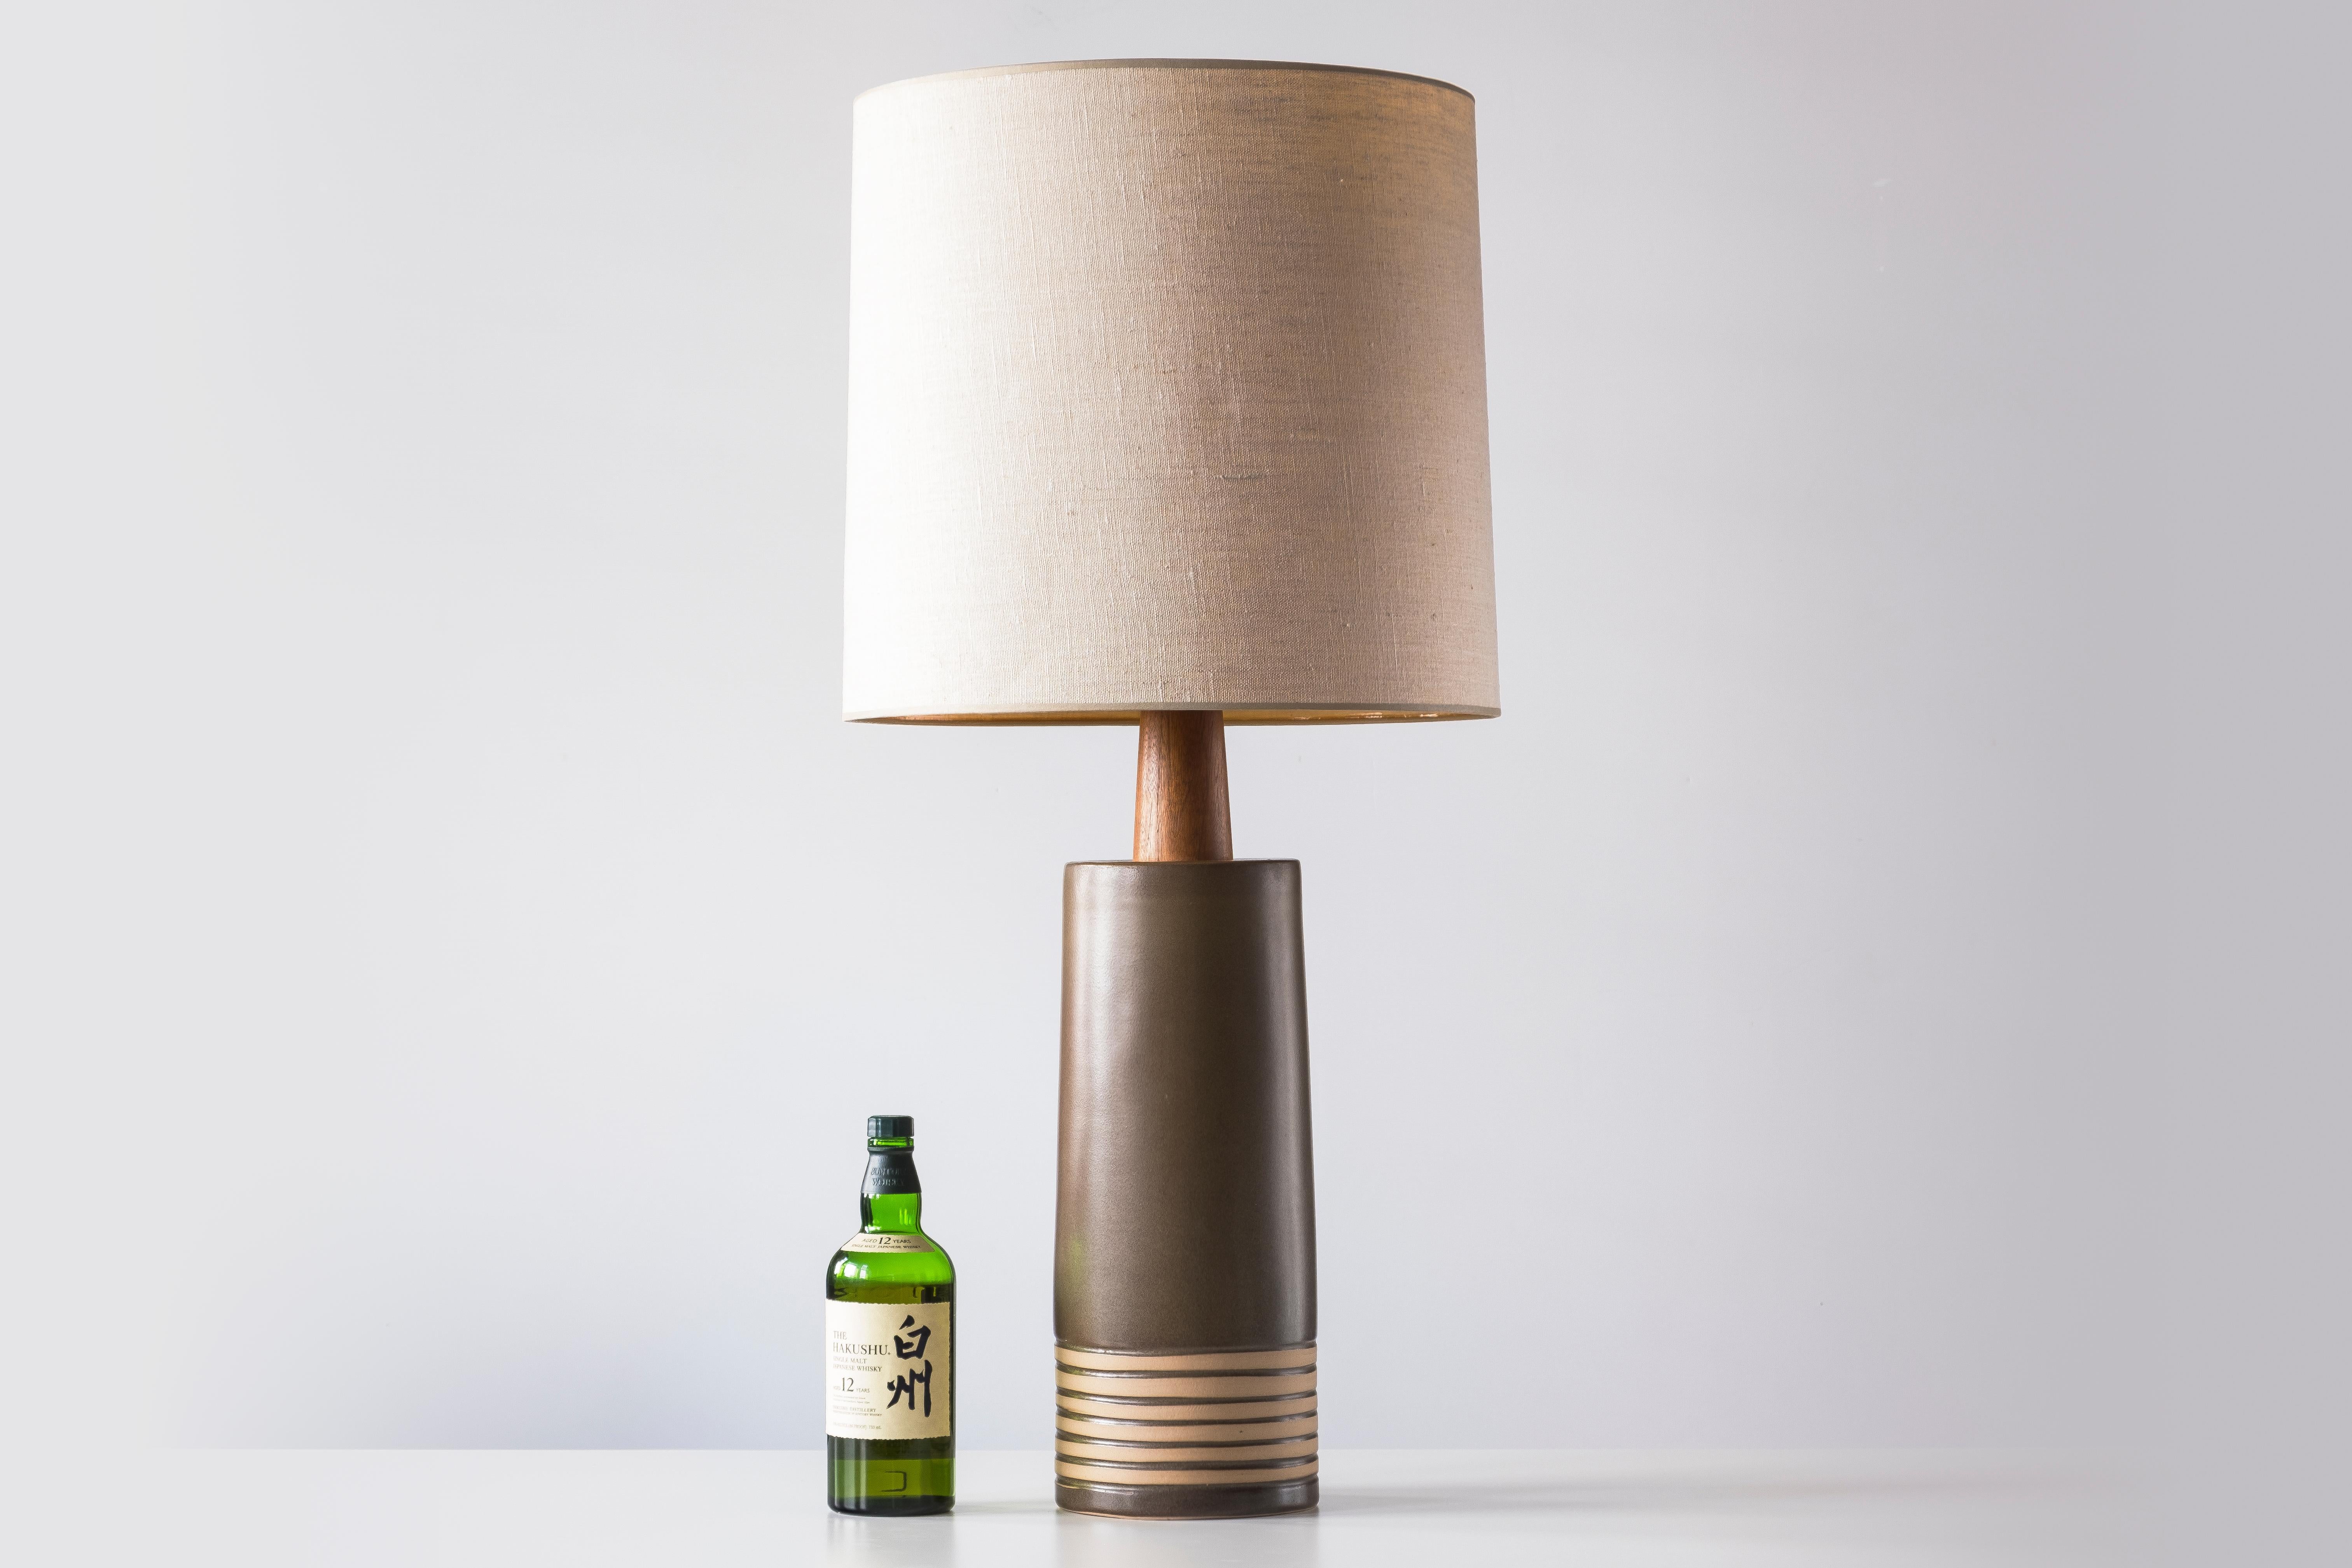 WHAT IS IT?
—
This signed Martz Model 223 lamp comes in matte olive glaze with six stripes towards the base revealing unglazed clay. The tall ceramic body gives way to a thick, tapered walnut neck and the whole ensemble is capped off with an